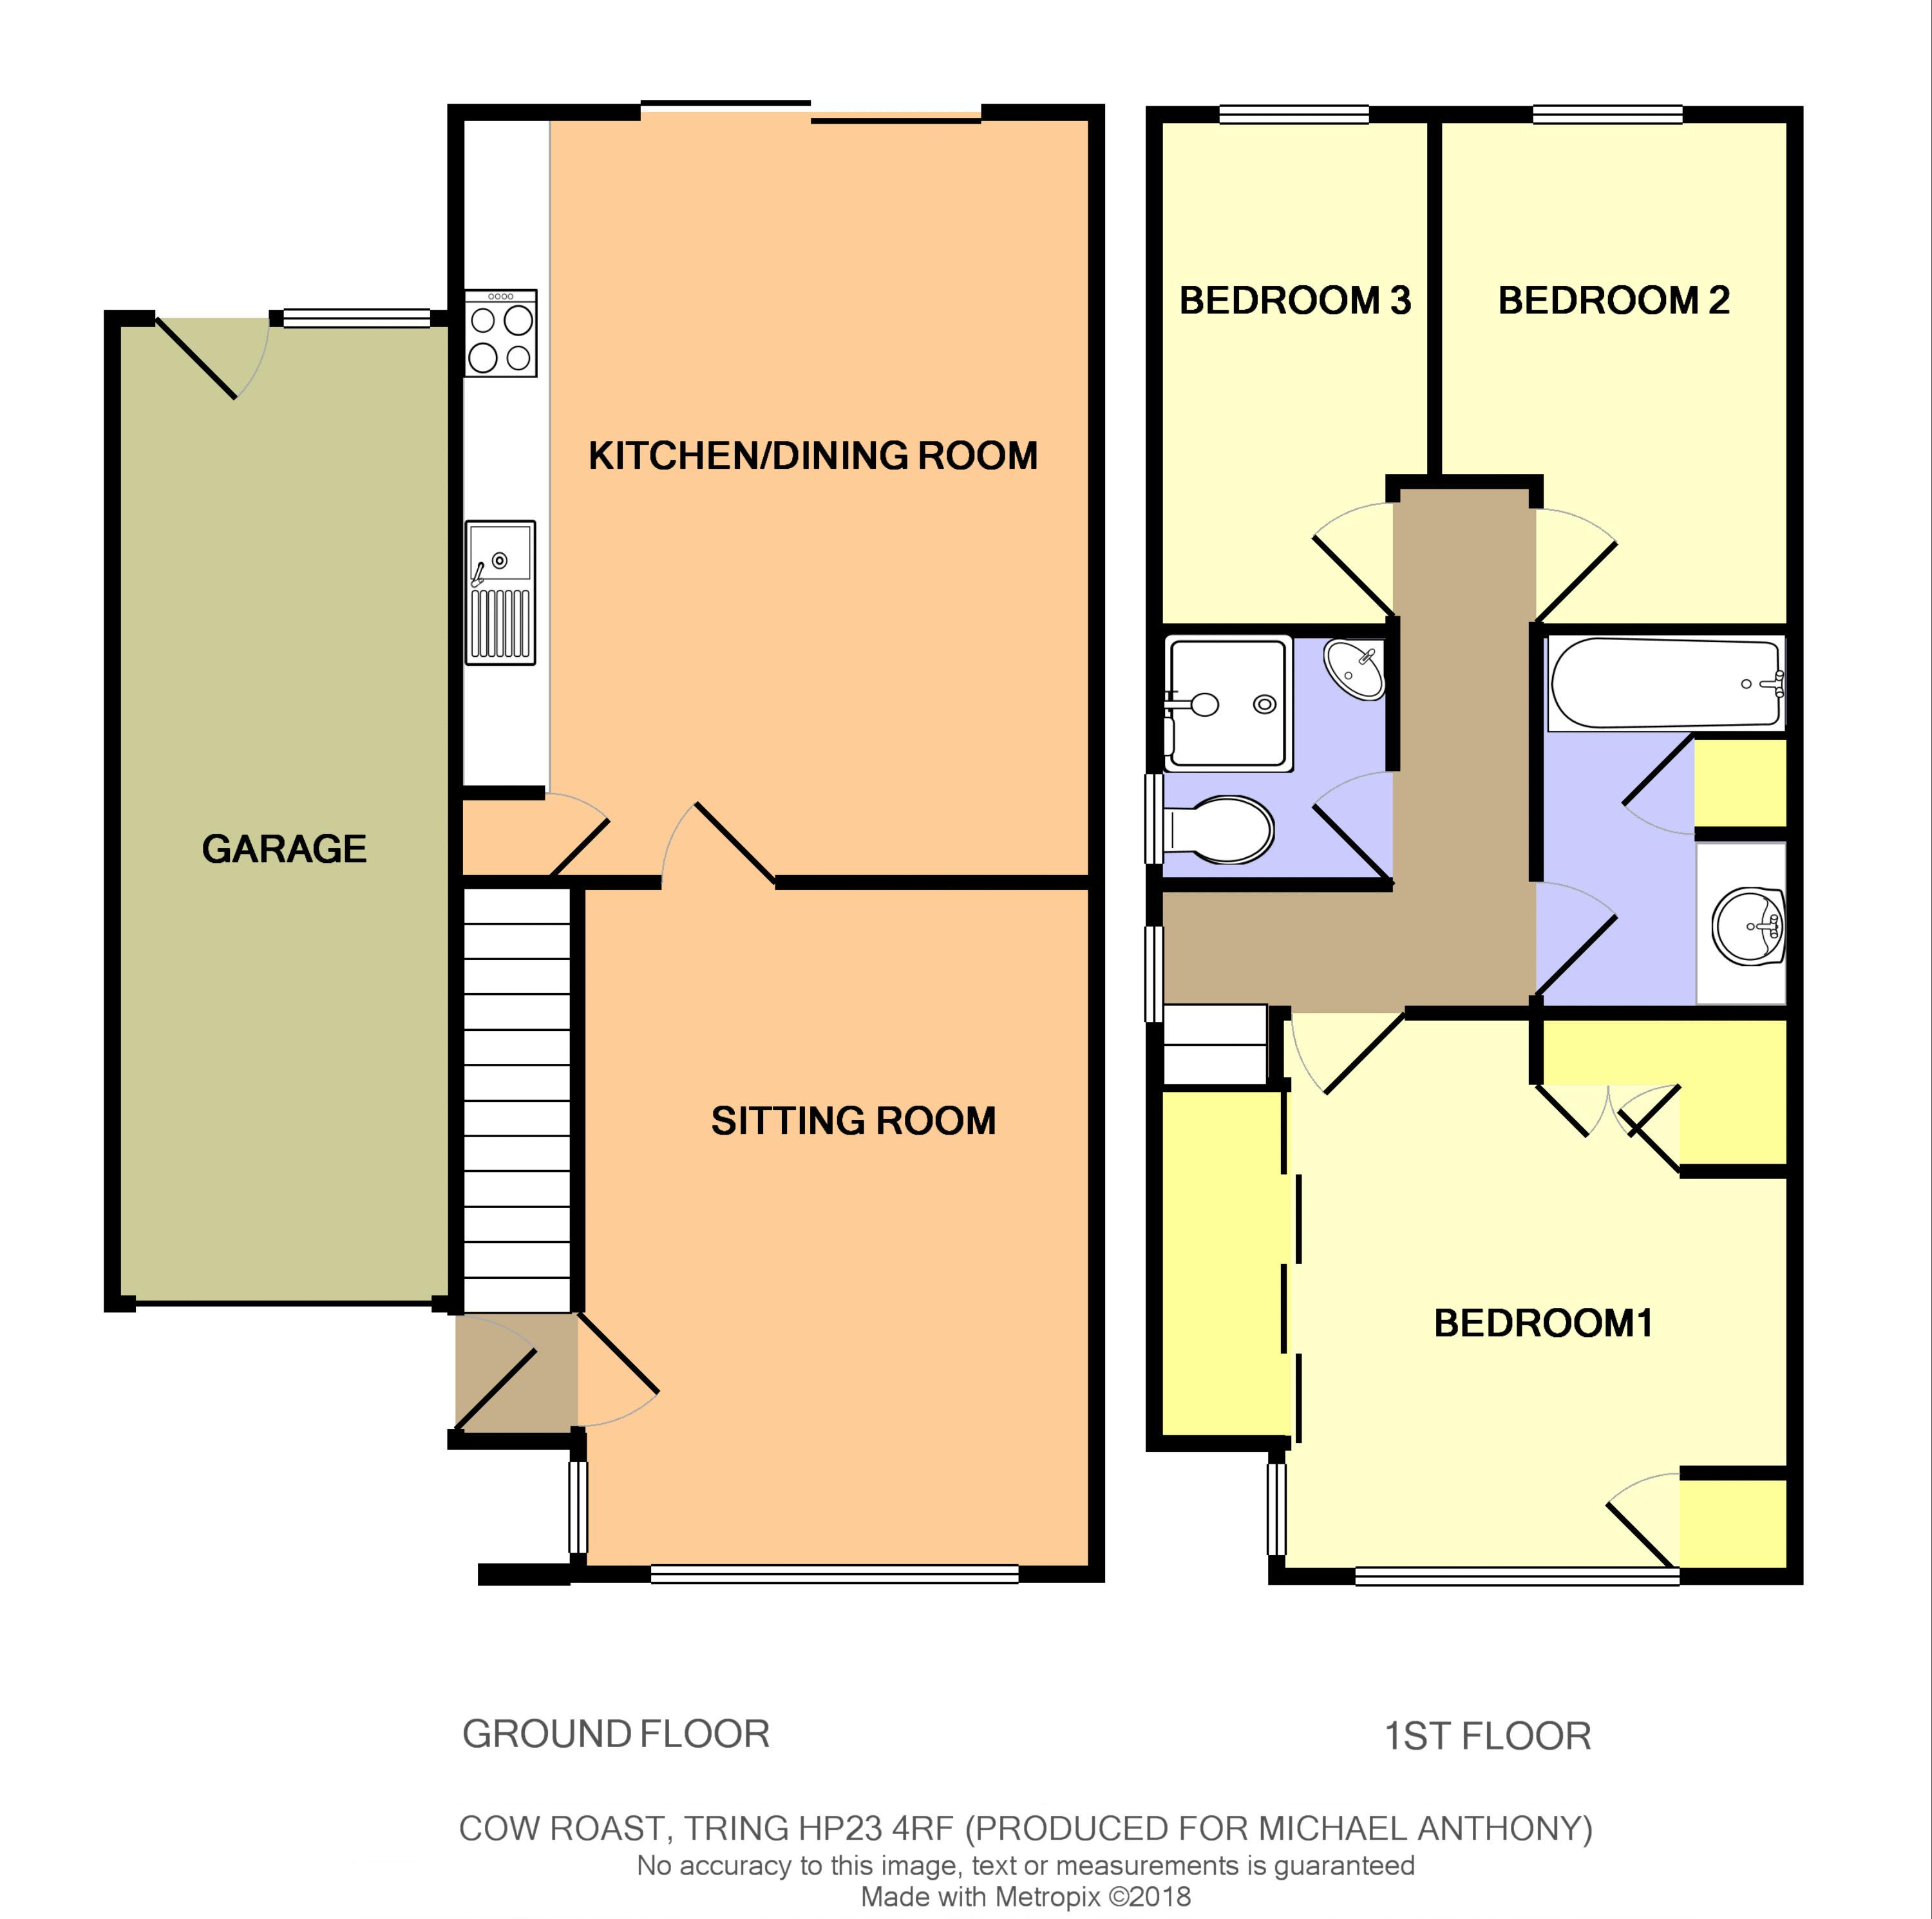 3 Bedrooms Semi-detached house for sale in Cow Roast, Tring HP23